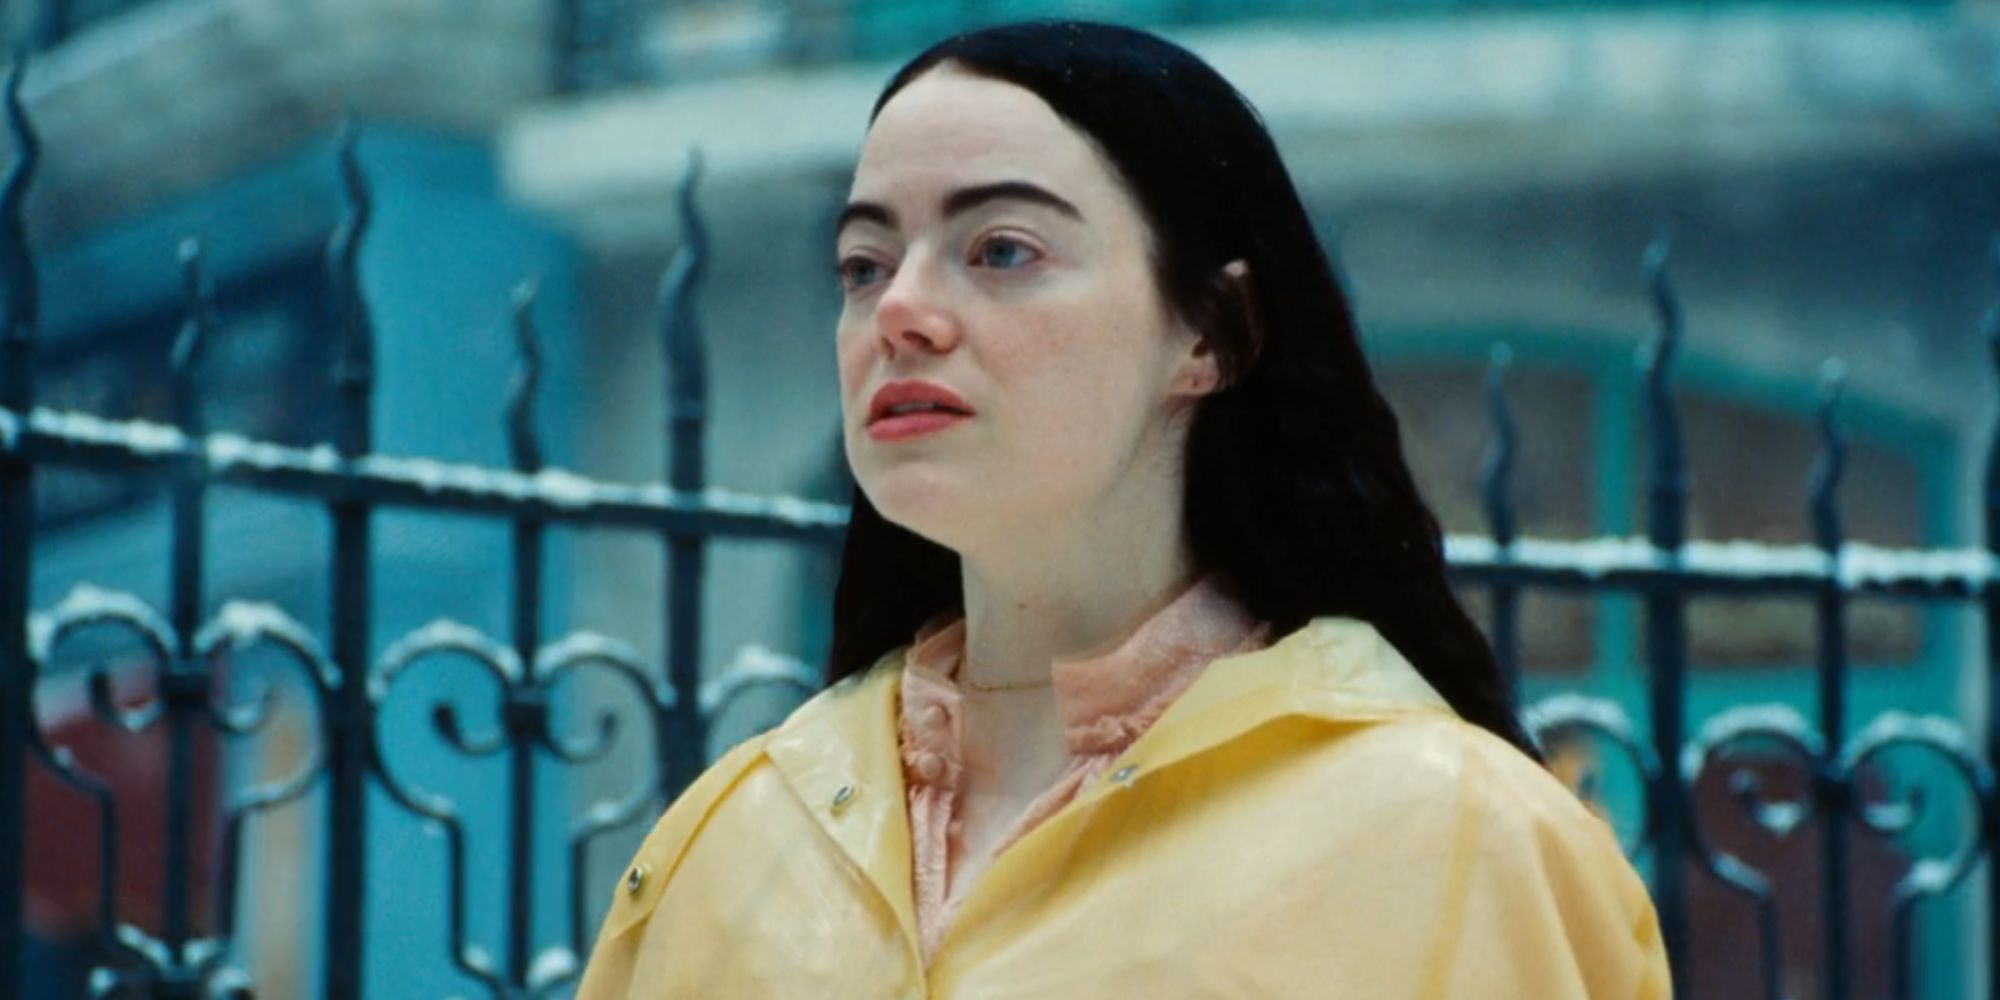 Emma Stone in a yellow coat with a straight face as Bella Baxter in Poor Things